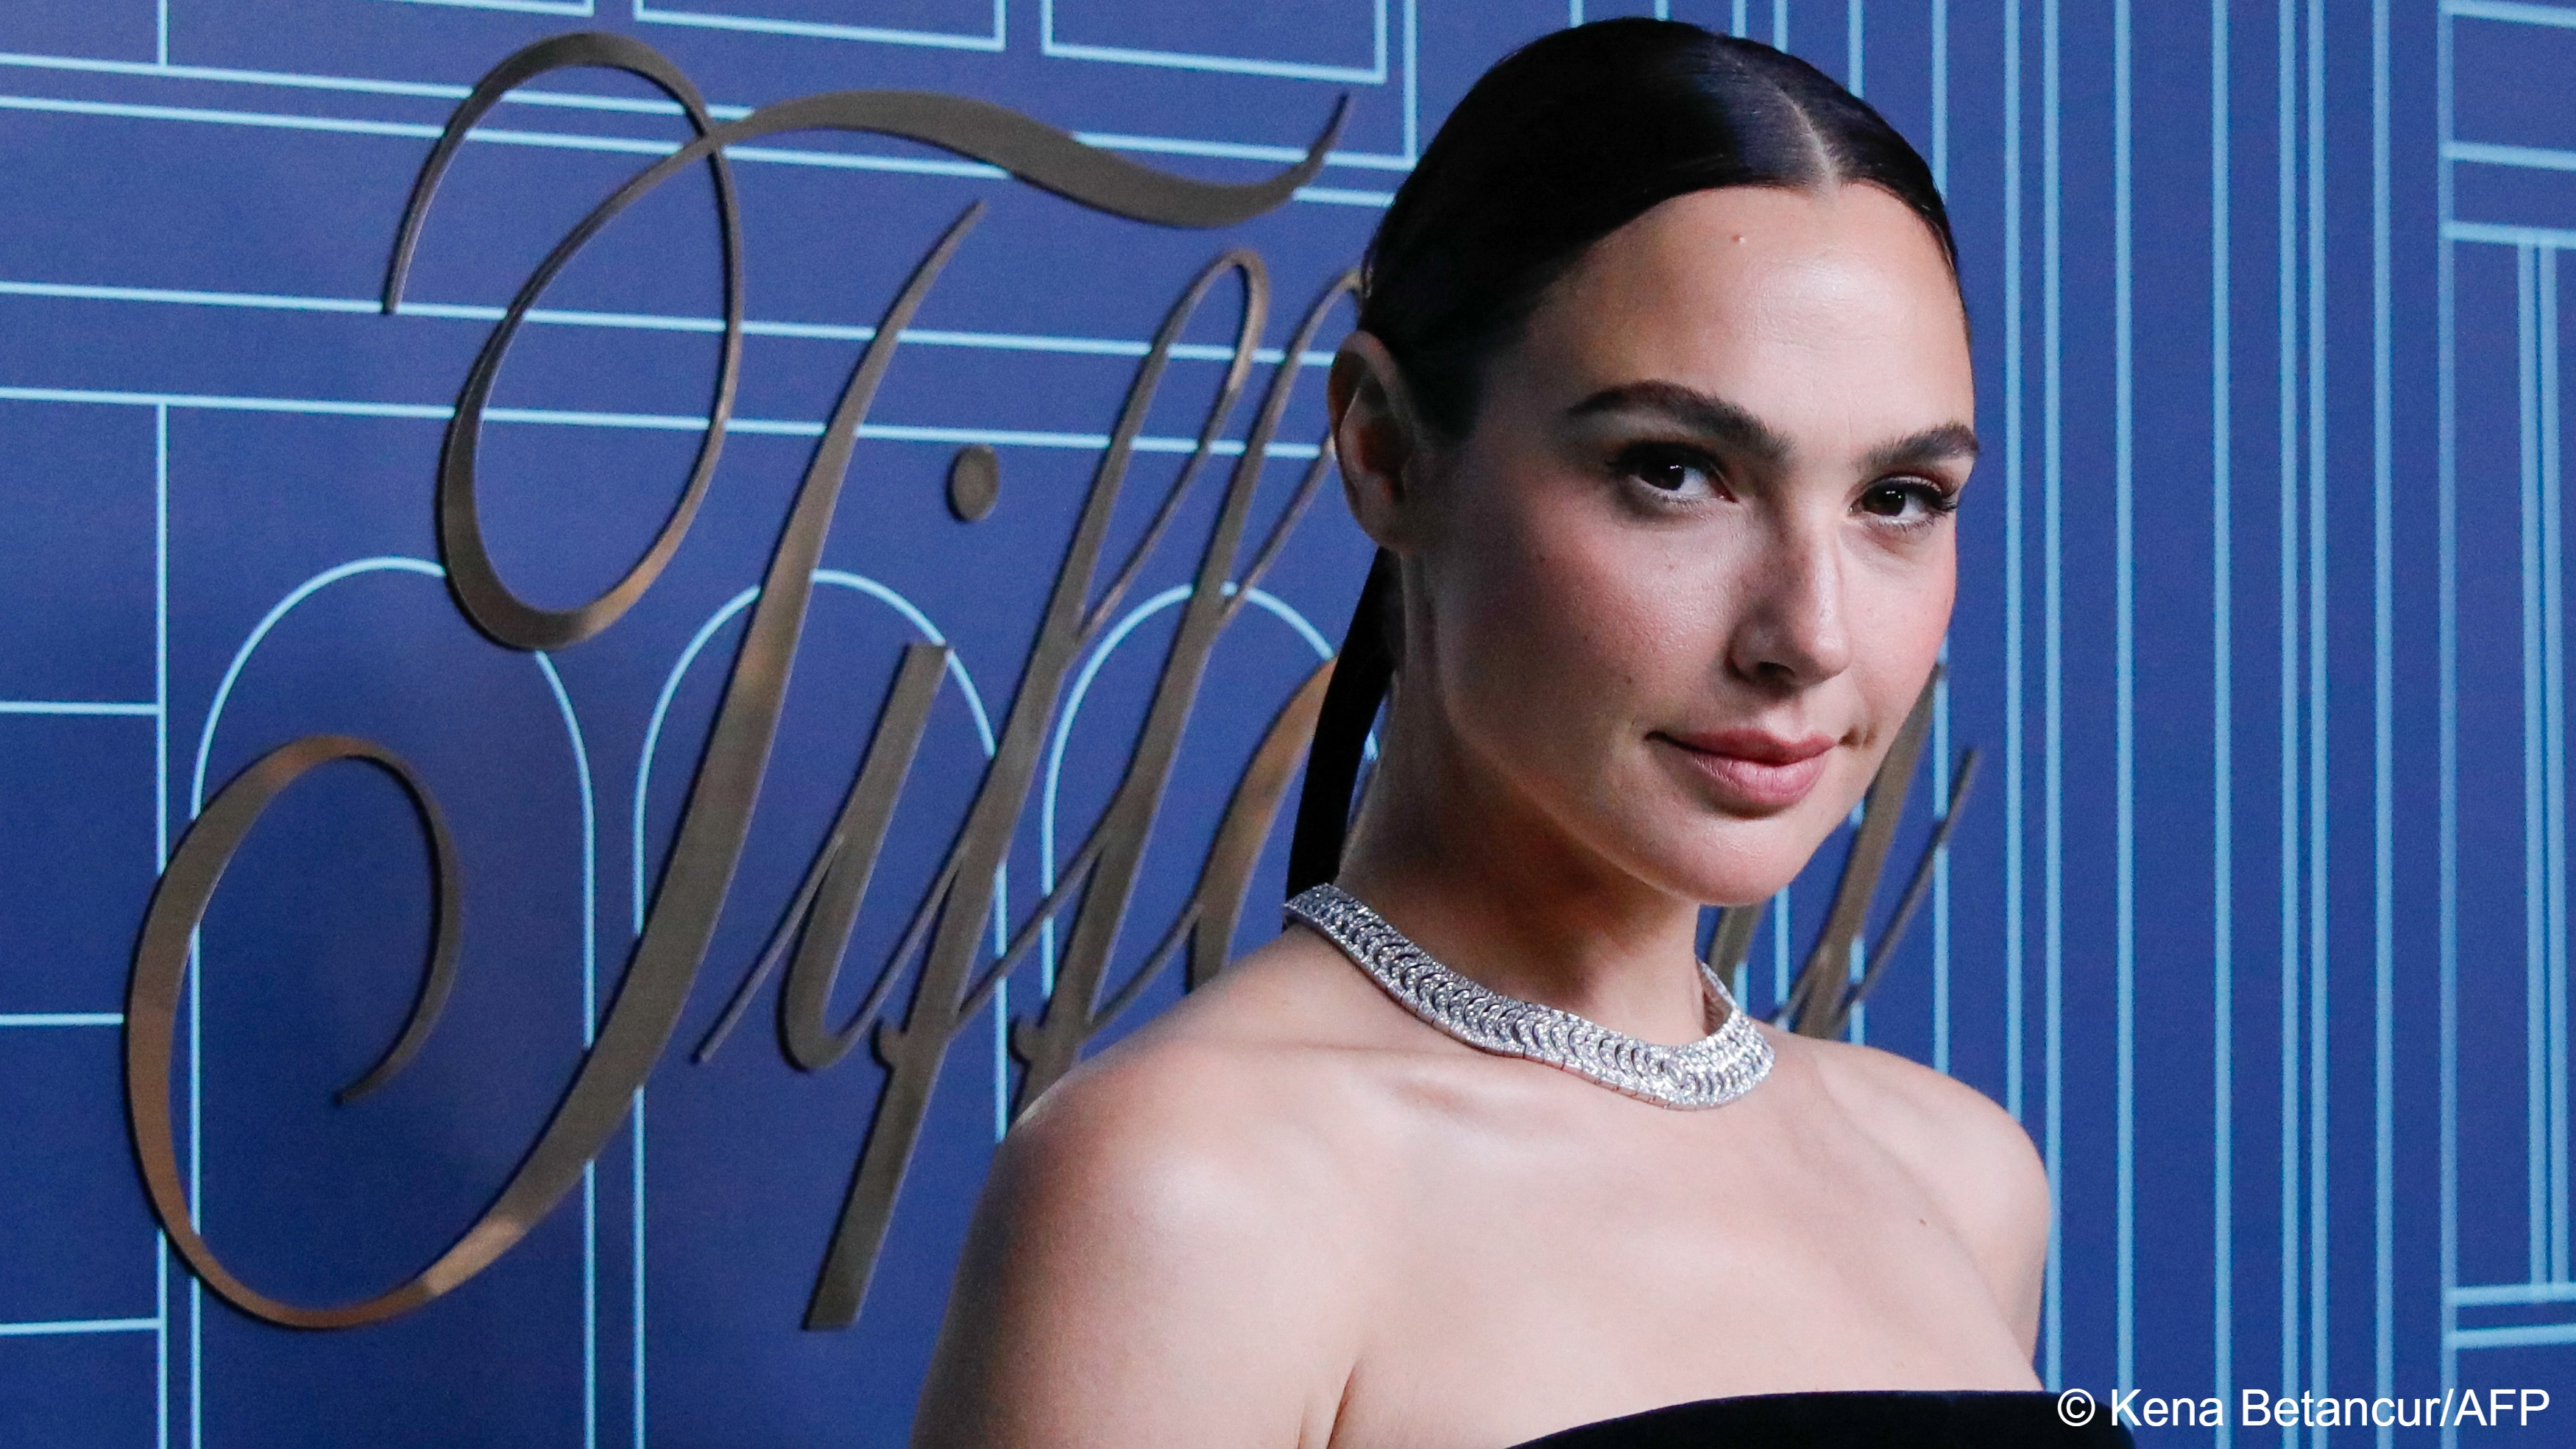 Portrait of Israeli actress Gal Gadot in evening dress, standing against a blue patterned background